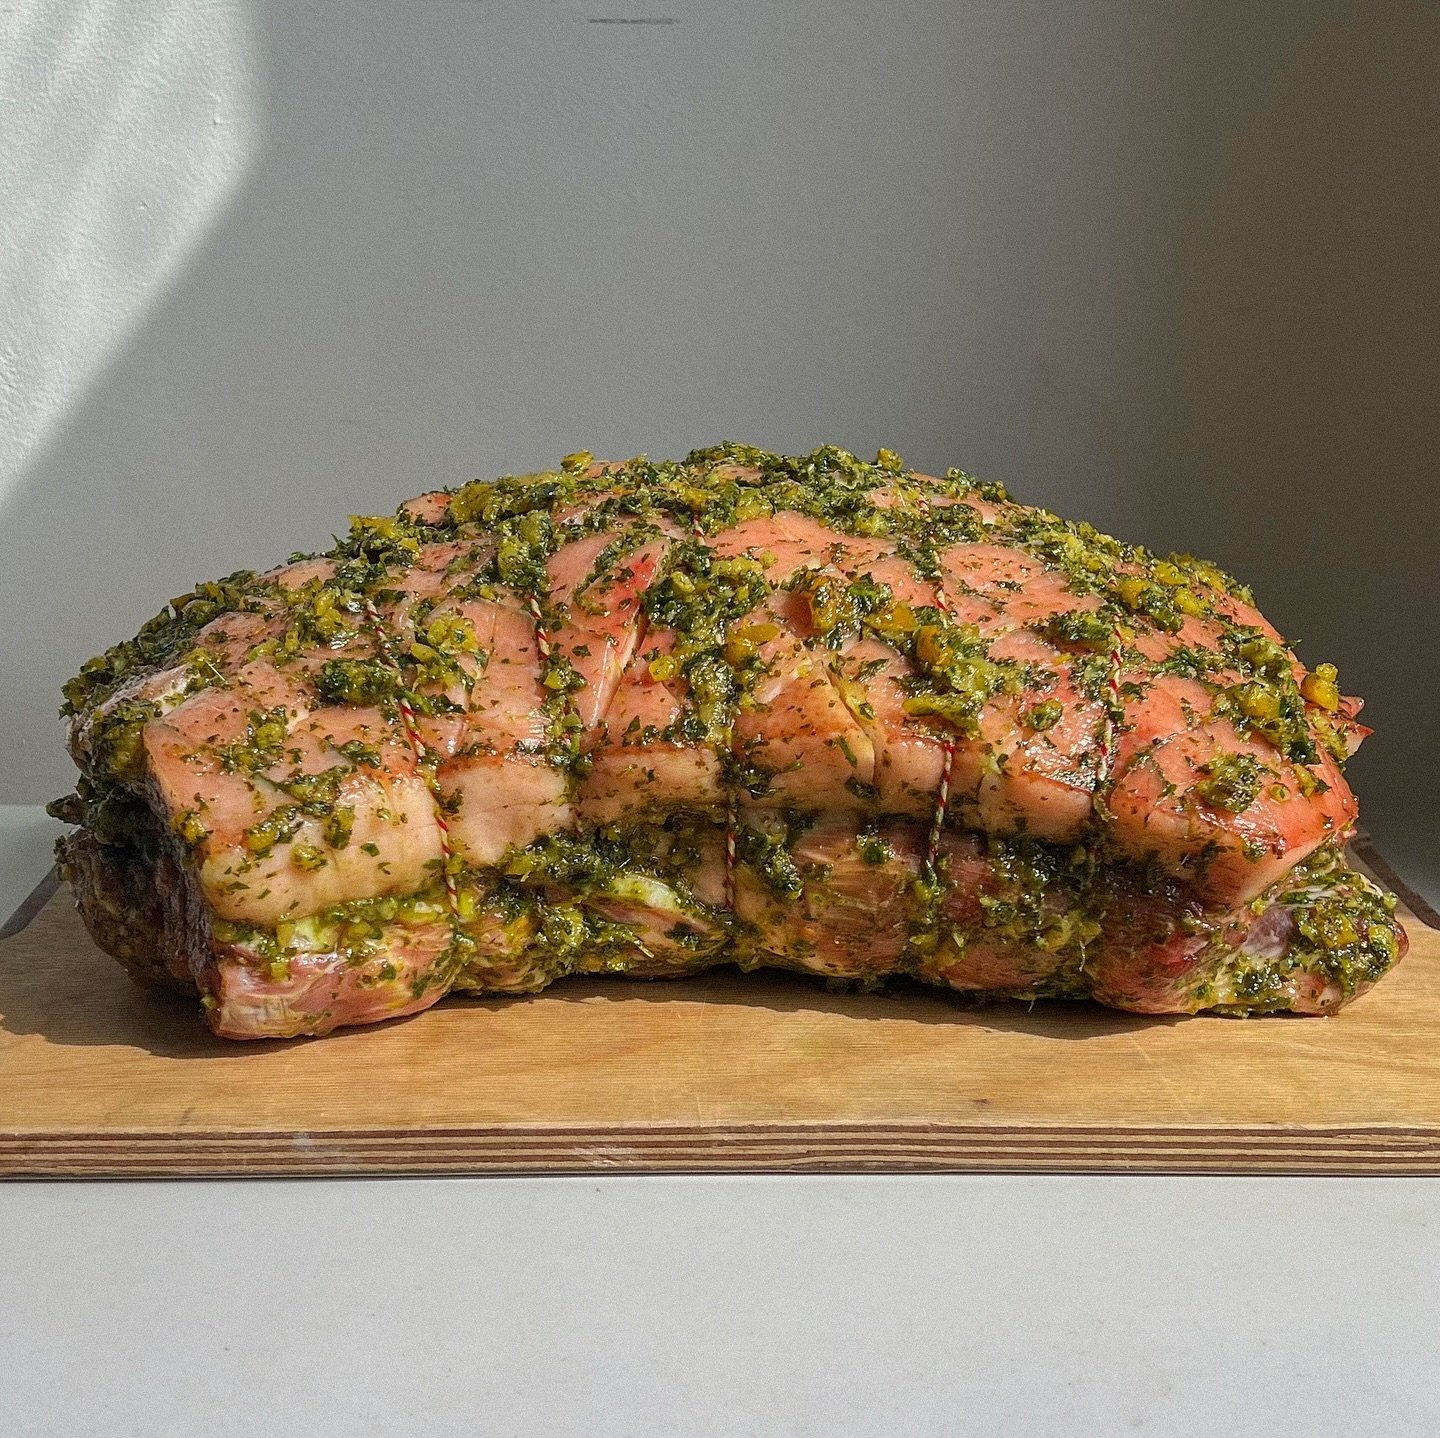 The Porchetta is all prepared for Supper Club, stuffed with nettle, wild garlic, and apricot.

Big shout-out to @oliversbutchery for always providing us with the best quality meat. These organic, rare breed Oxford Sandy and Black pigs from Dartmouth 